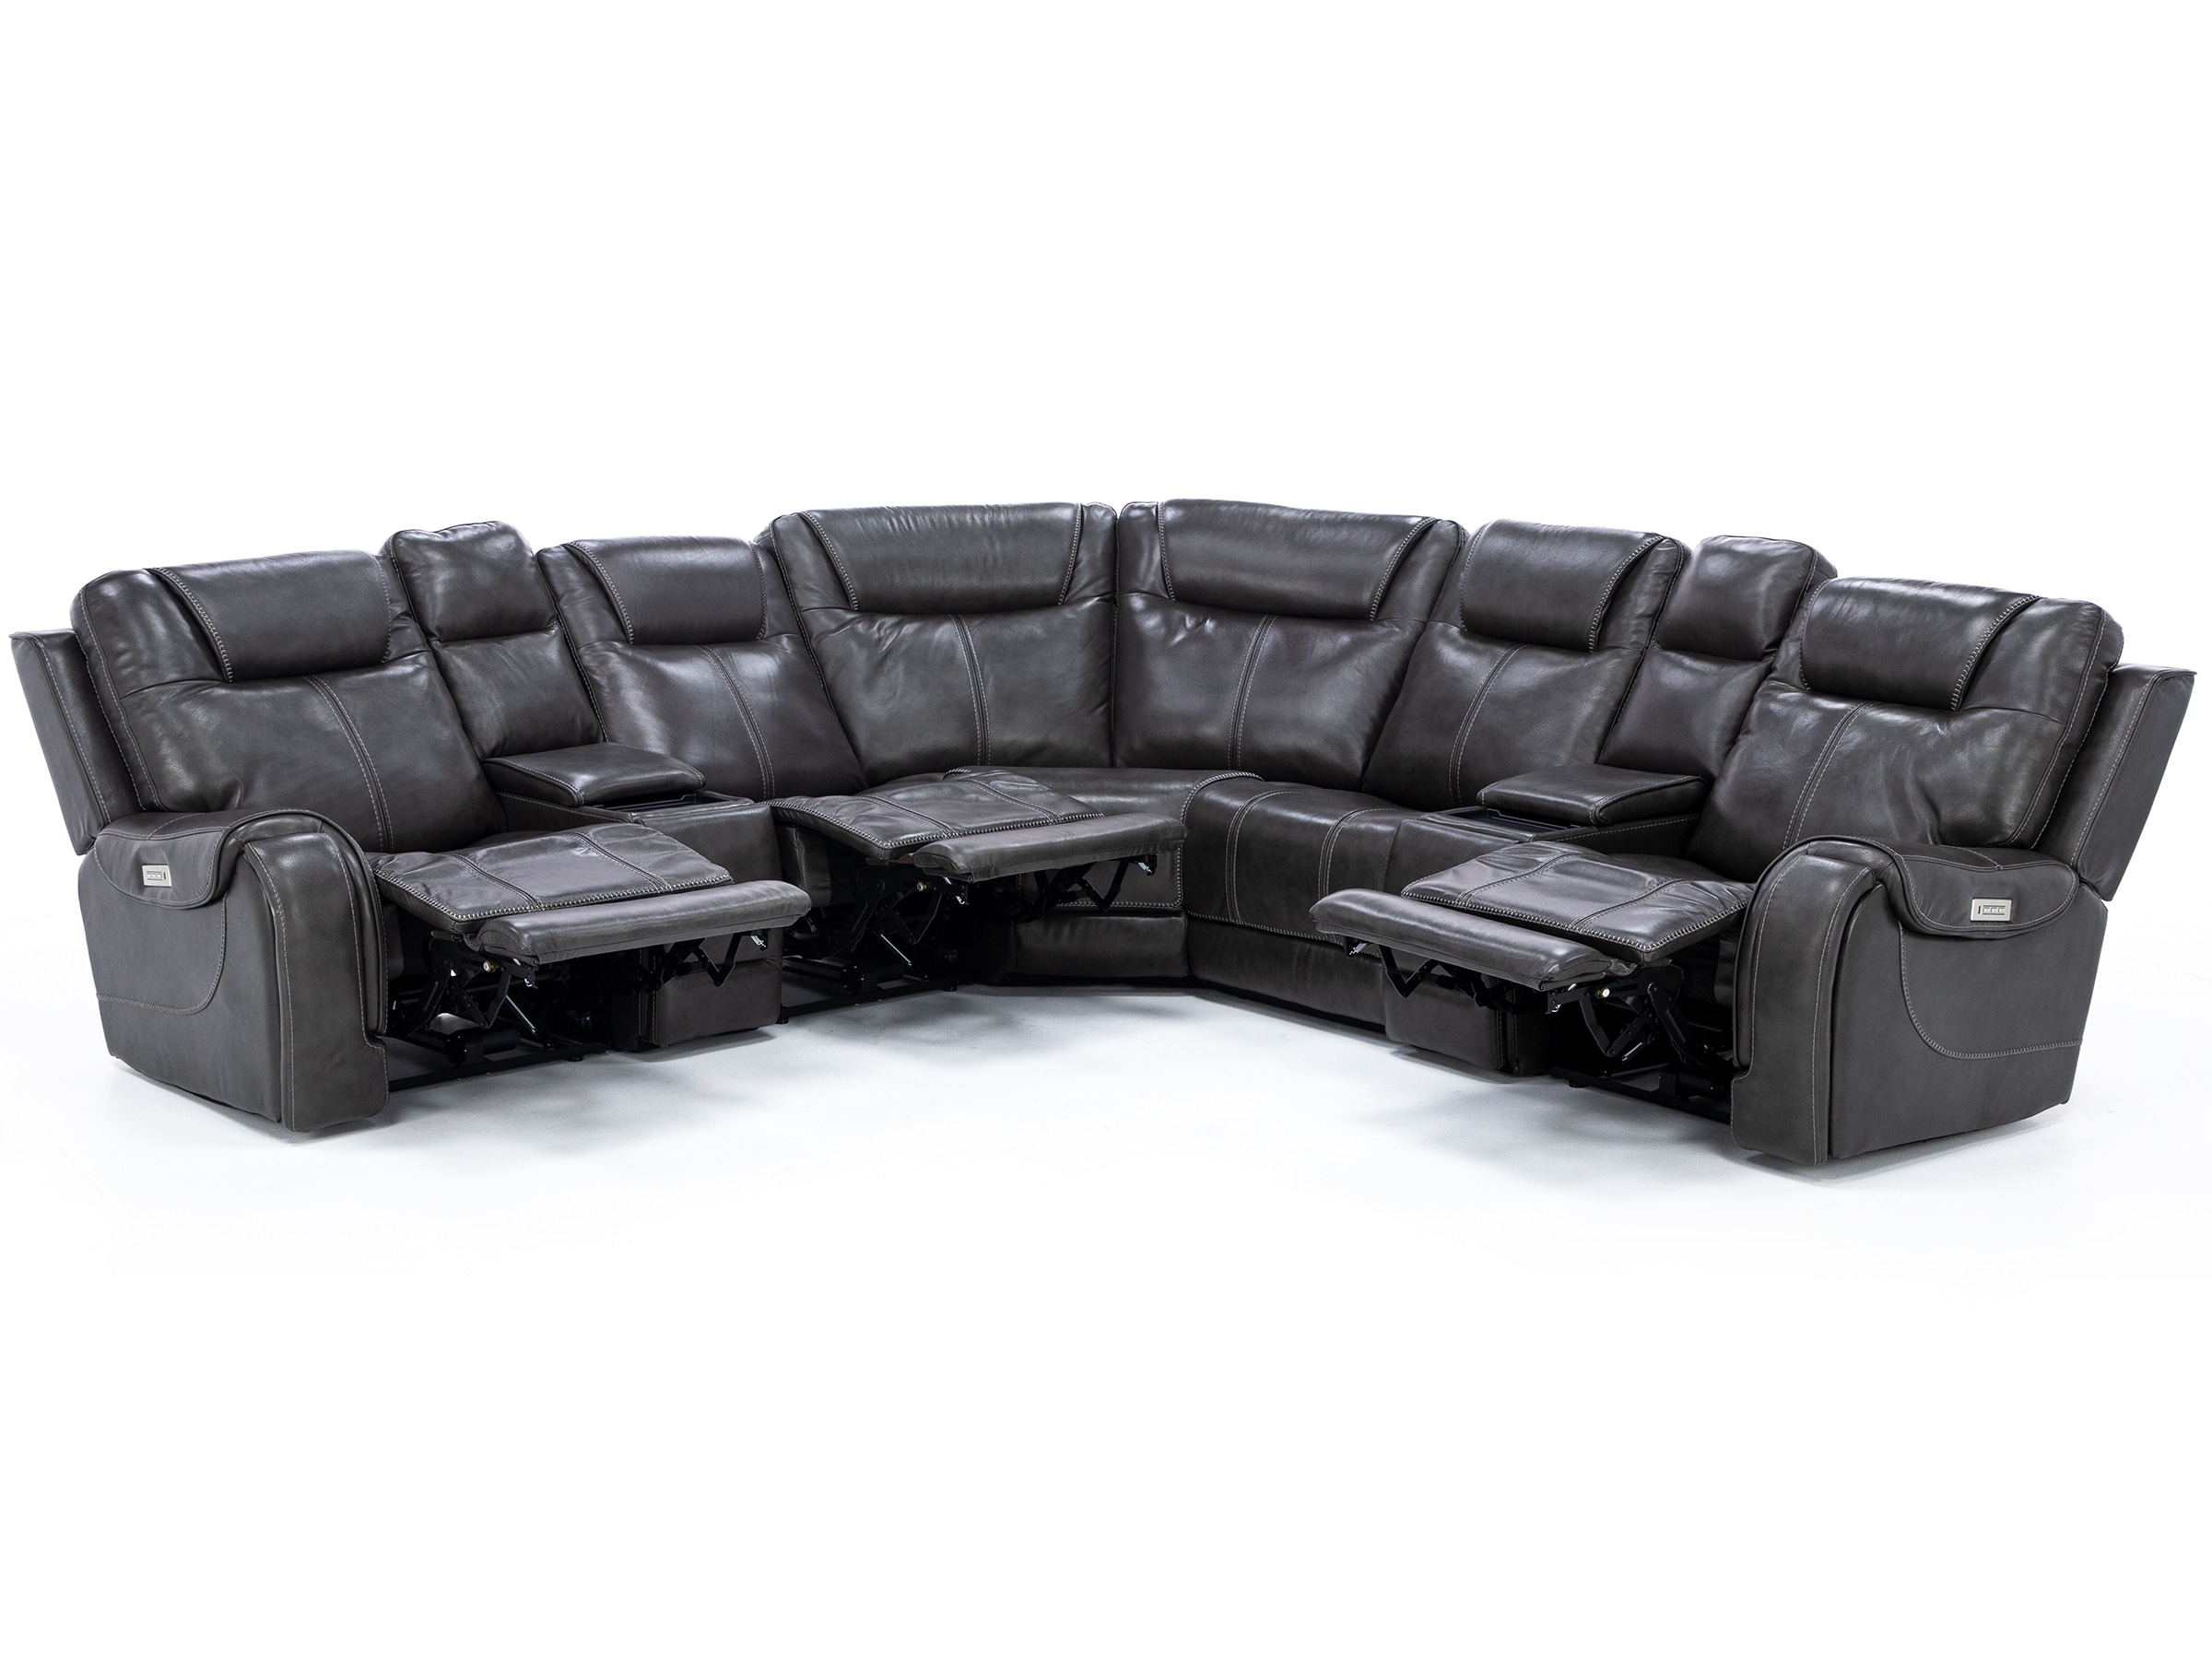 Zion 7-Pc. Leather Fully Steinhafels Modular | Reclining Loaded